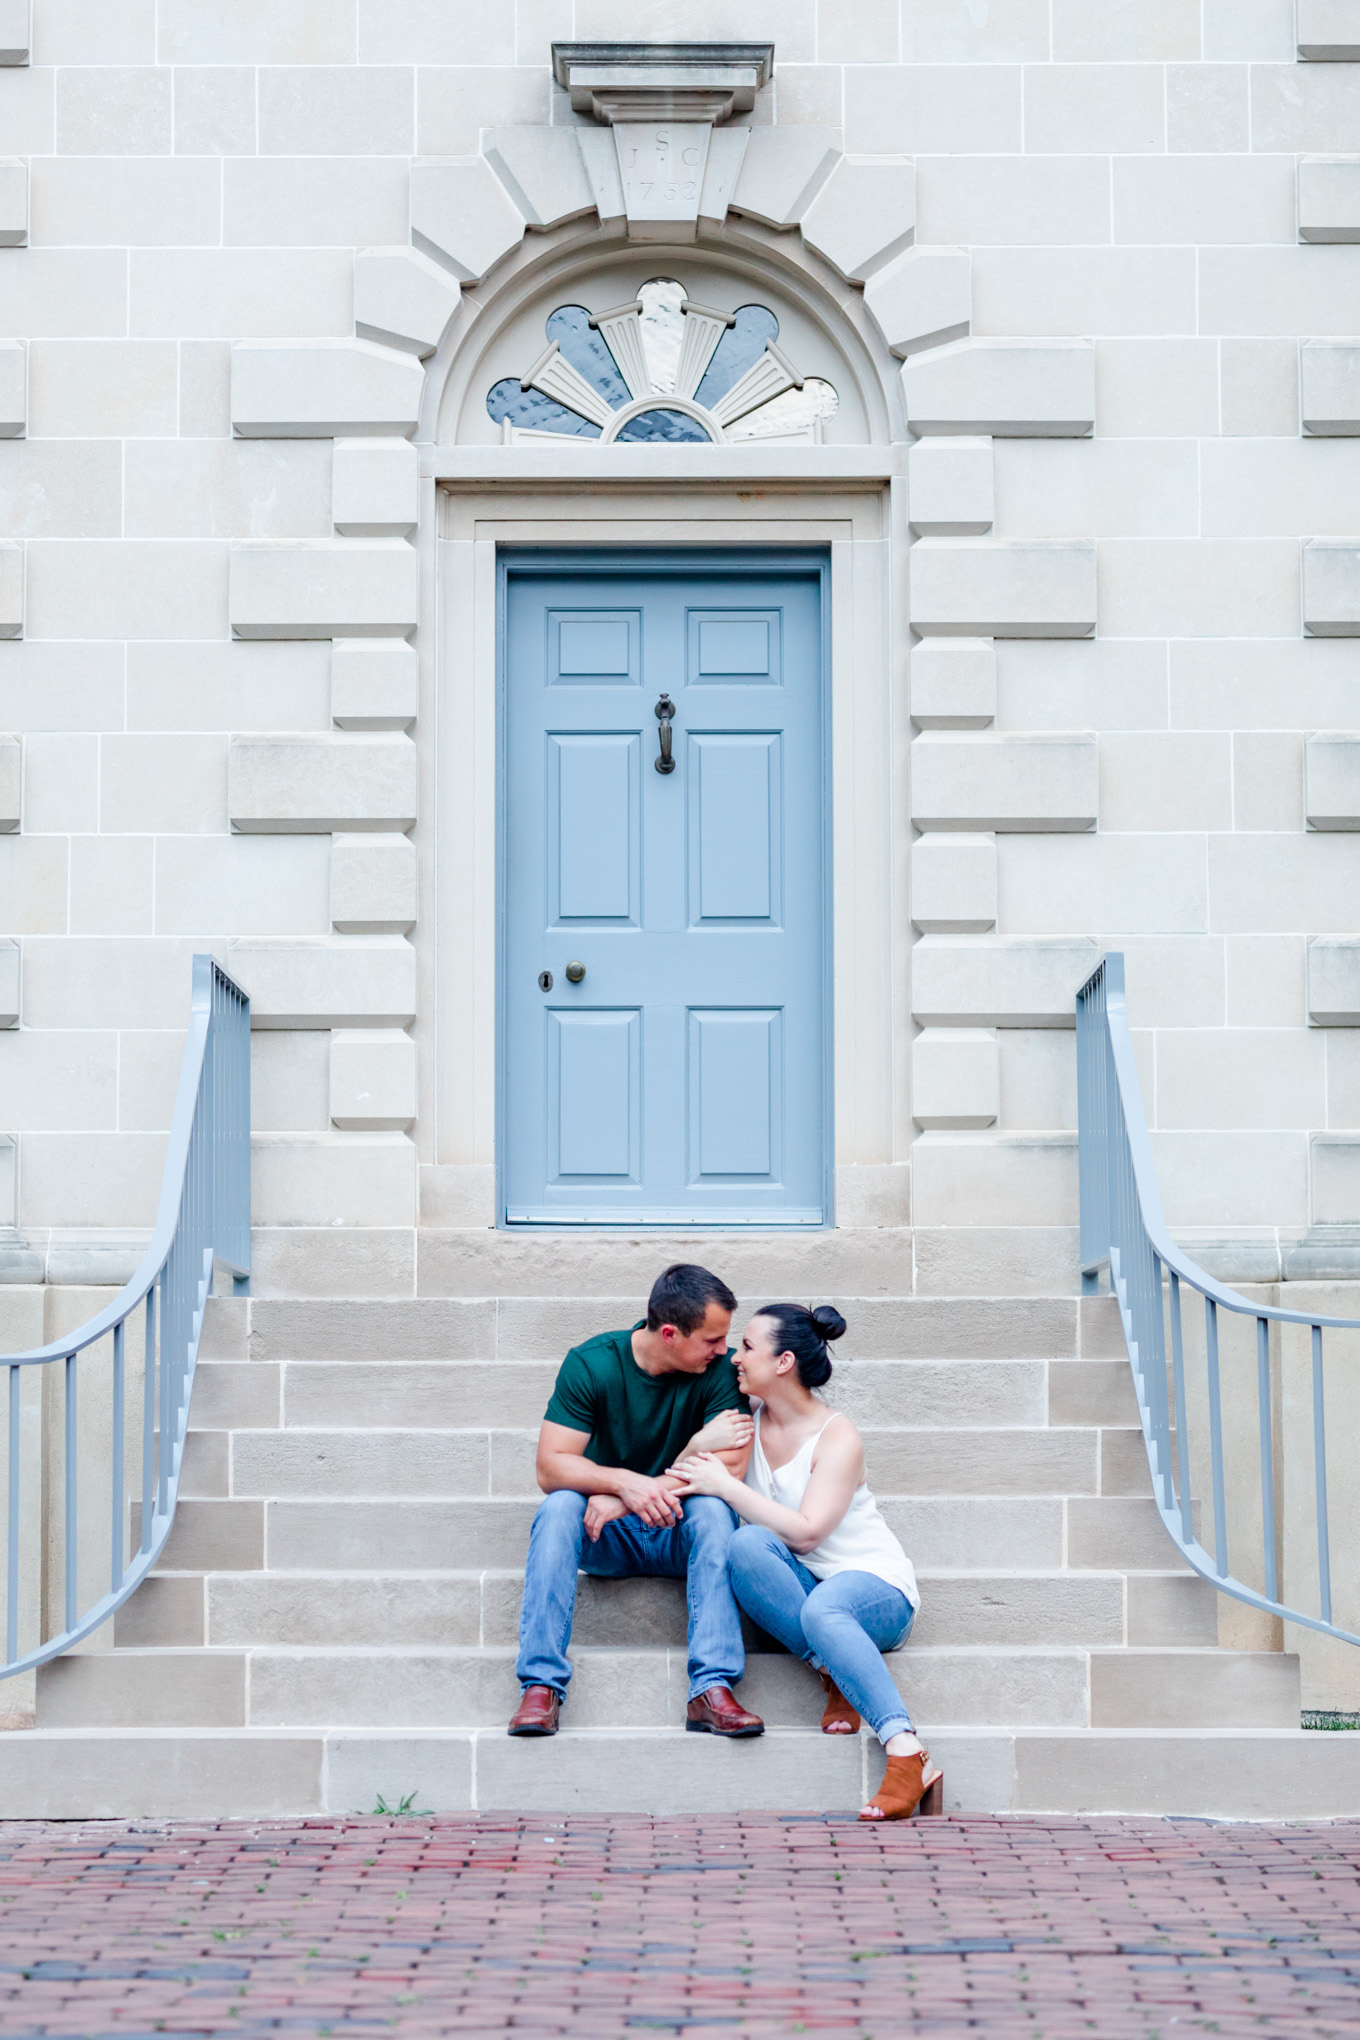 Carlyle House engagement photos, Carlyle House, Alexandria engagement photos, Old Town Alexandria engagement photos, Old Town Alexandria, Alexandria engagement photos, Alexandria Virginia, classic engagement photos, historic homes engagement photos, casual engagement photos, Rachel E.H. Photography, couple sitting